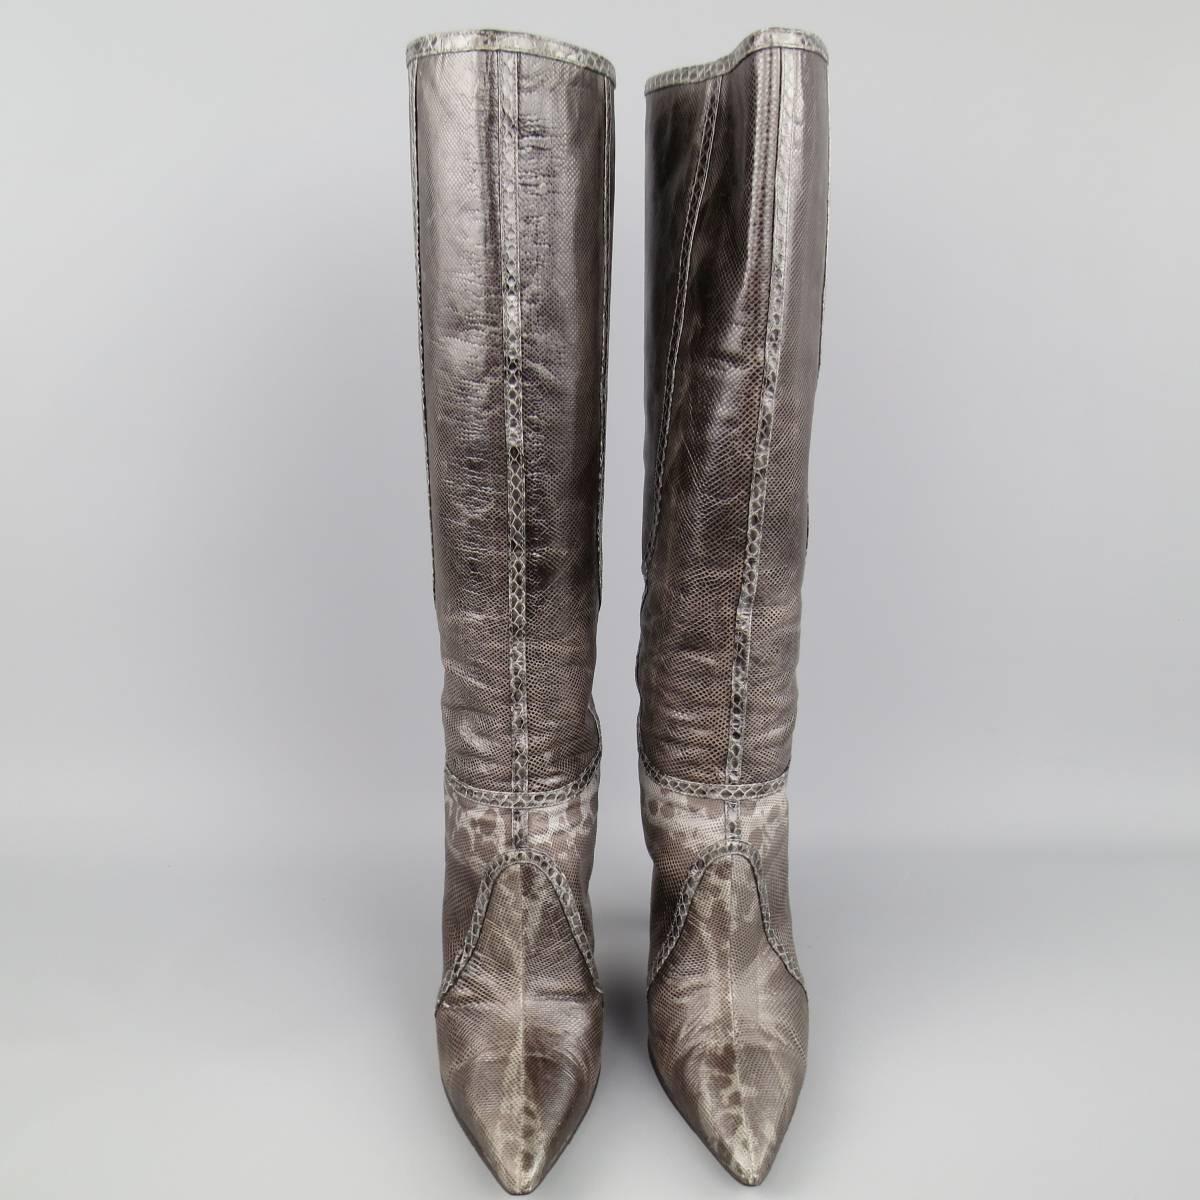 Fabulous JIMMY CHOO "Million" knee high boots come in a multi-tonal Karung  snakeskin and feature a pointed toe, contrast snake leather piping throughout, covered stiletto heel, and back zip closure. Minor wear on back of heel leather.